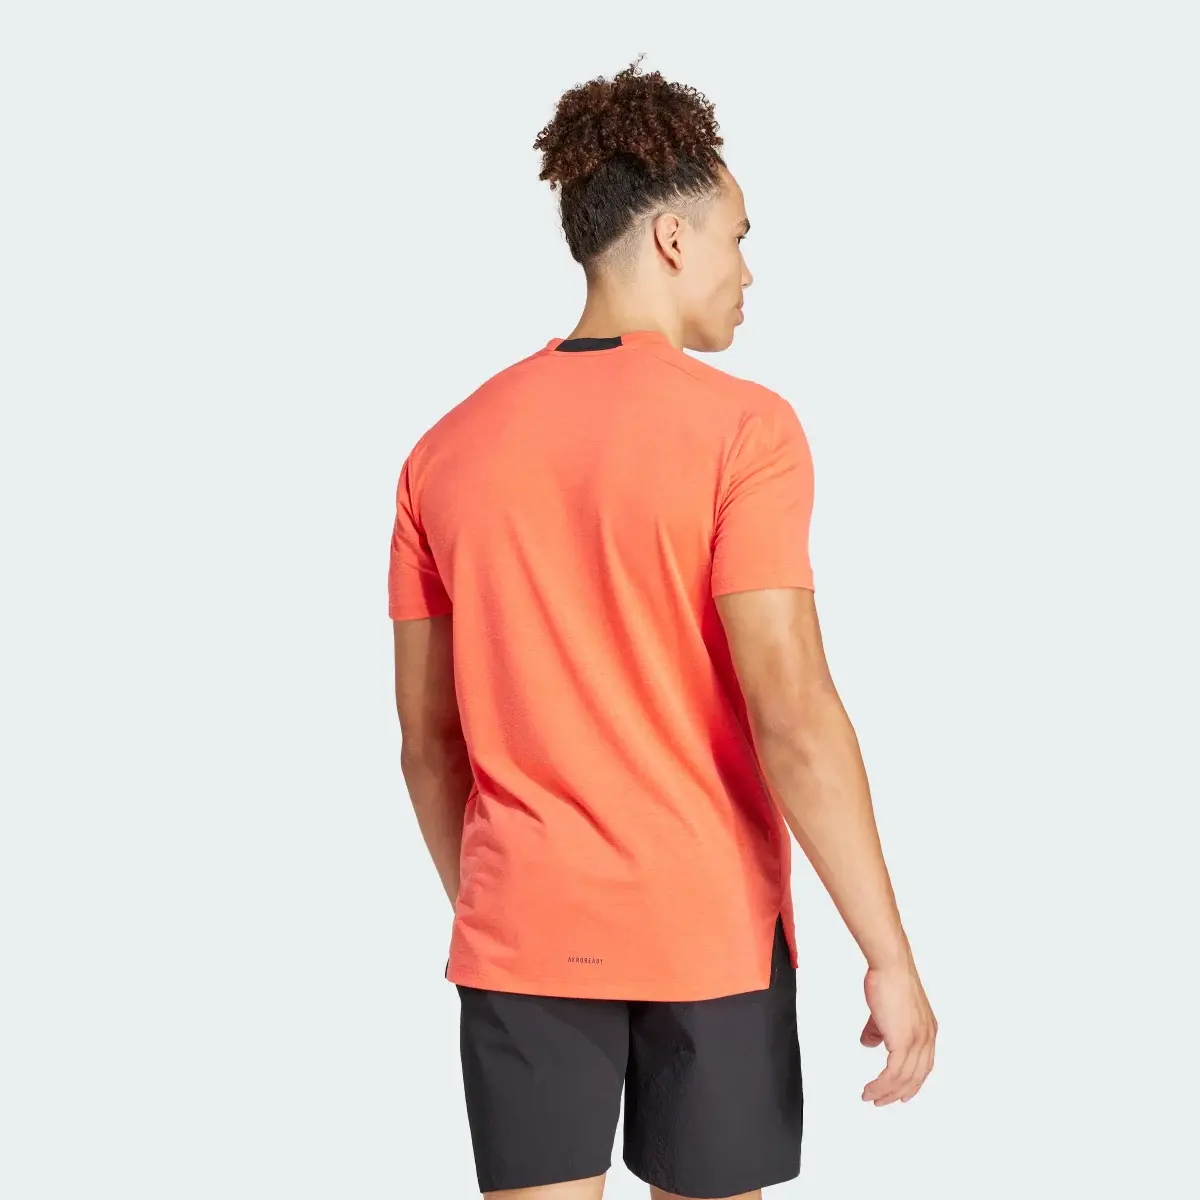 Adidas Designed for Training Workout Tee. 3